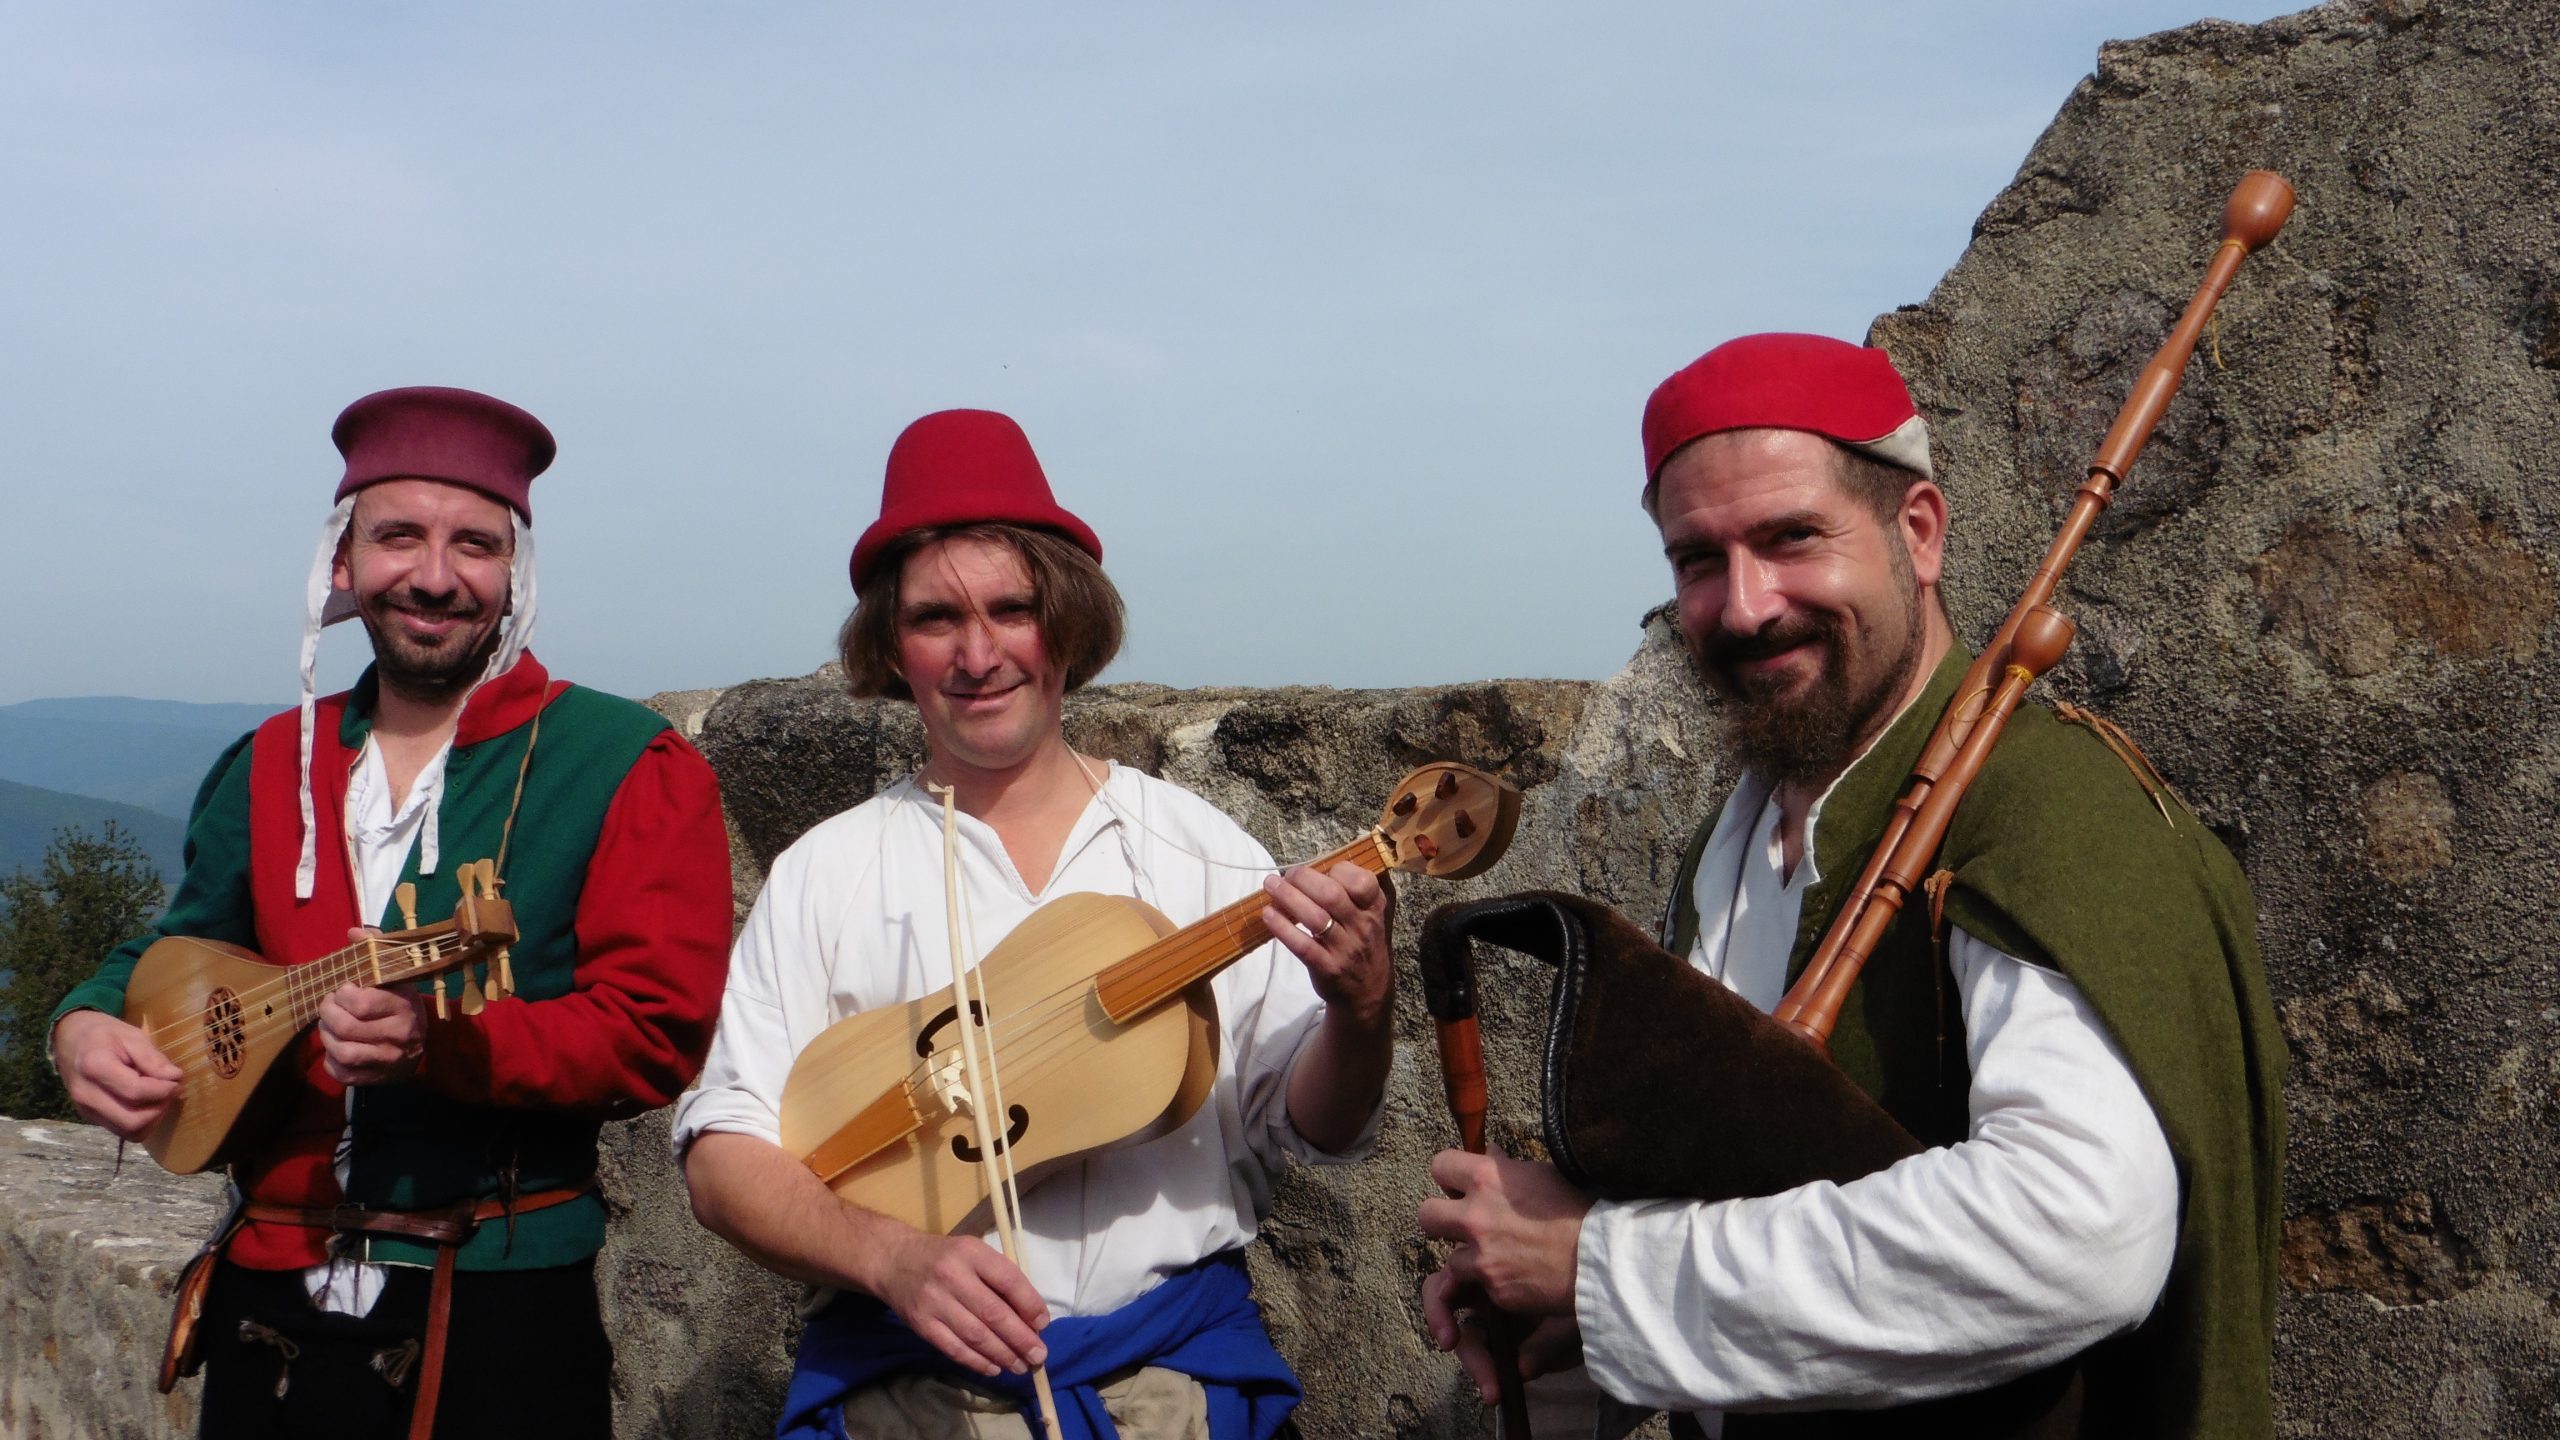 Hauvoy's minstrels posing with their medieval instruments at the Haut-Koenigsbourg's castle